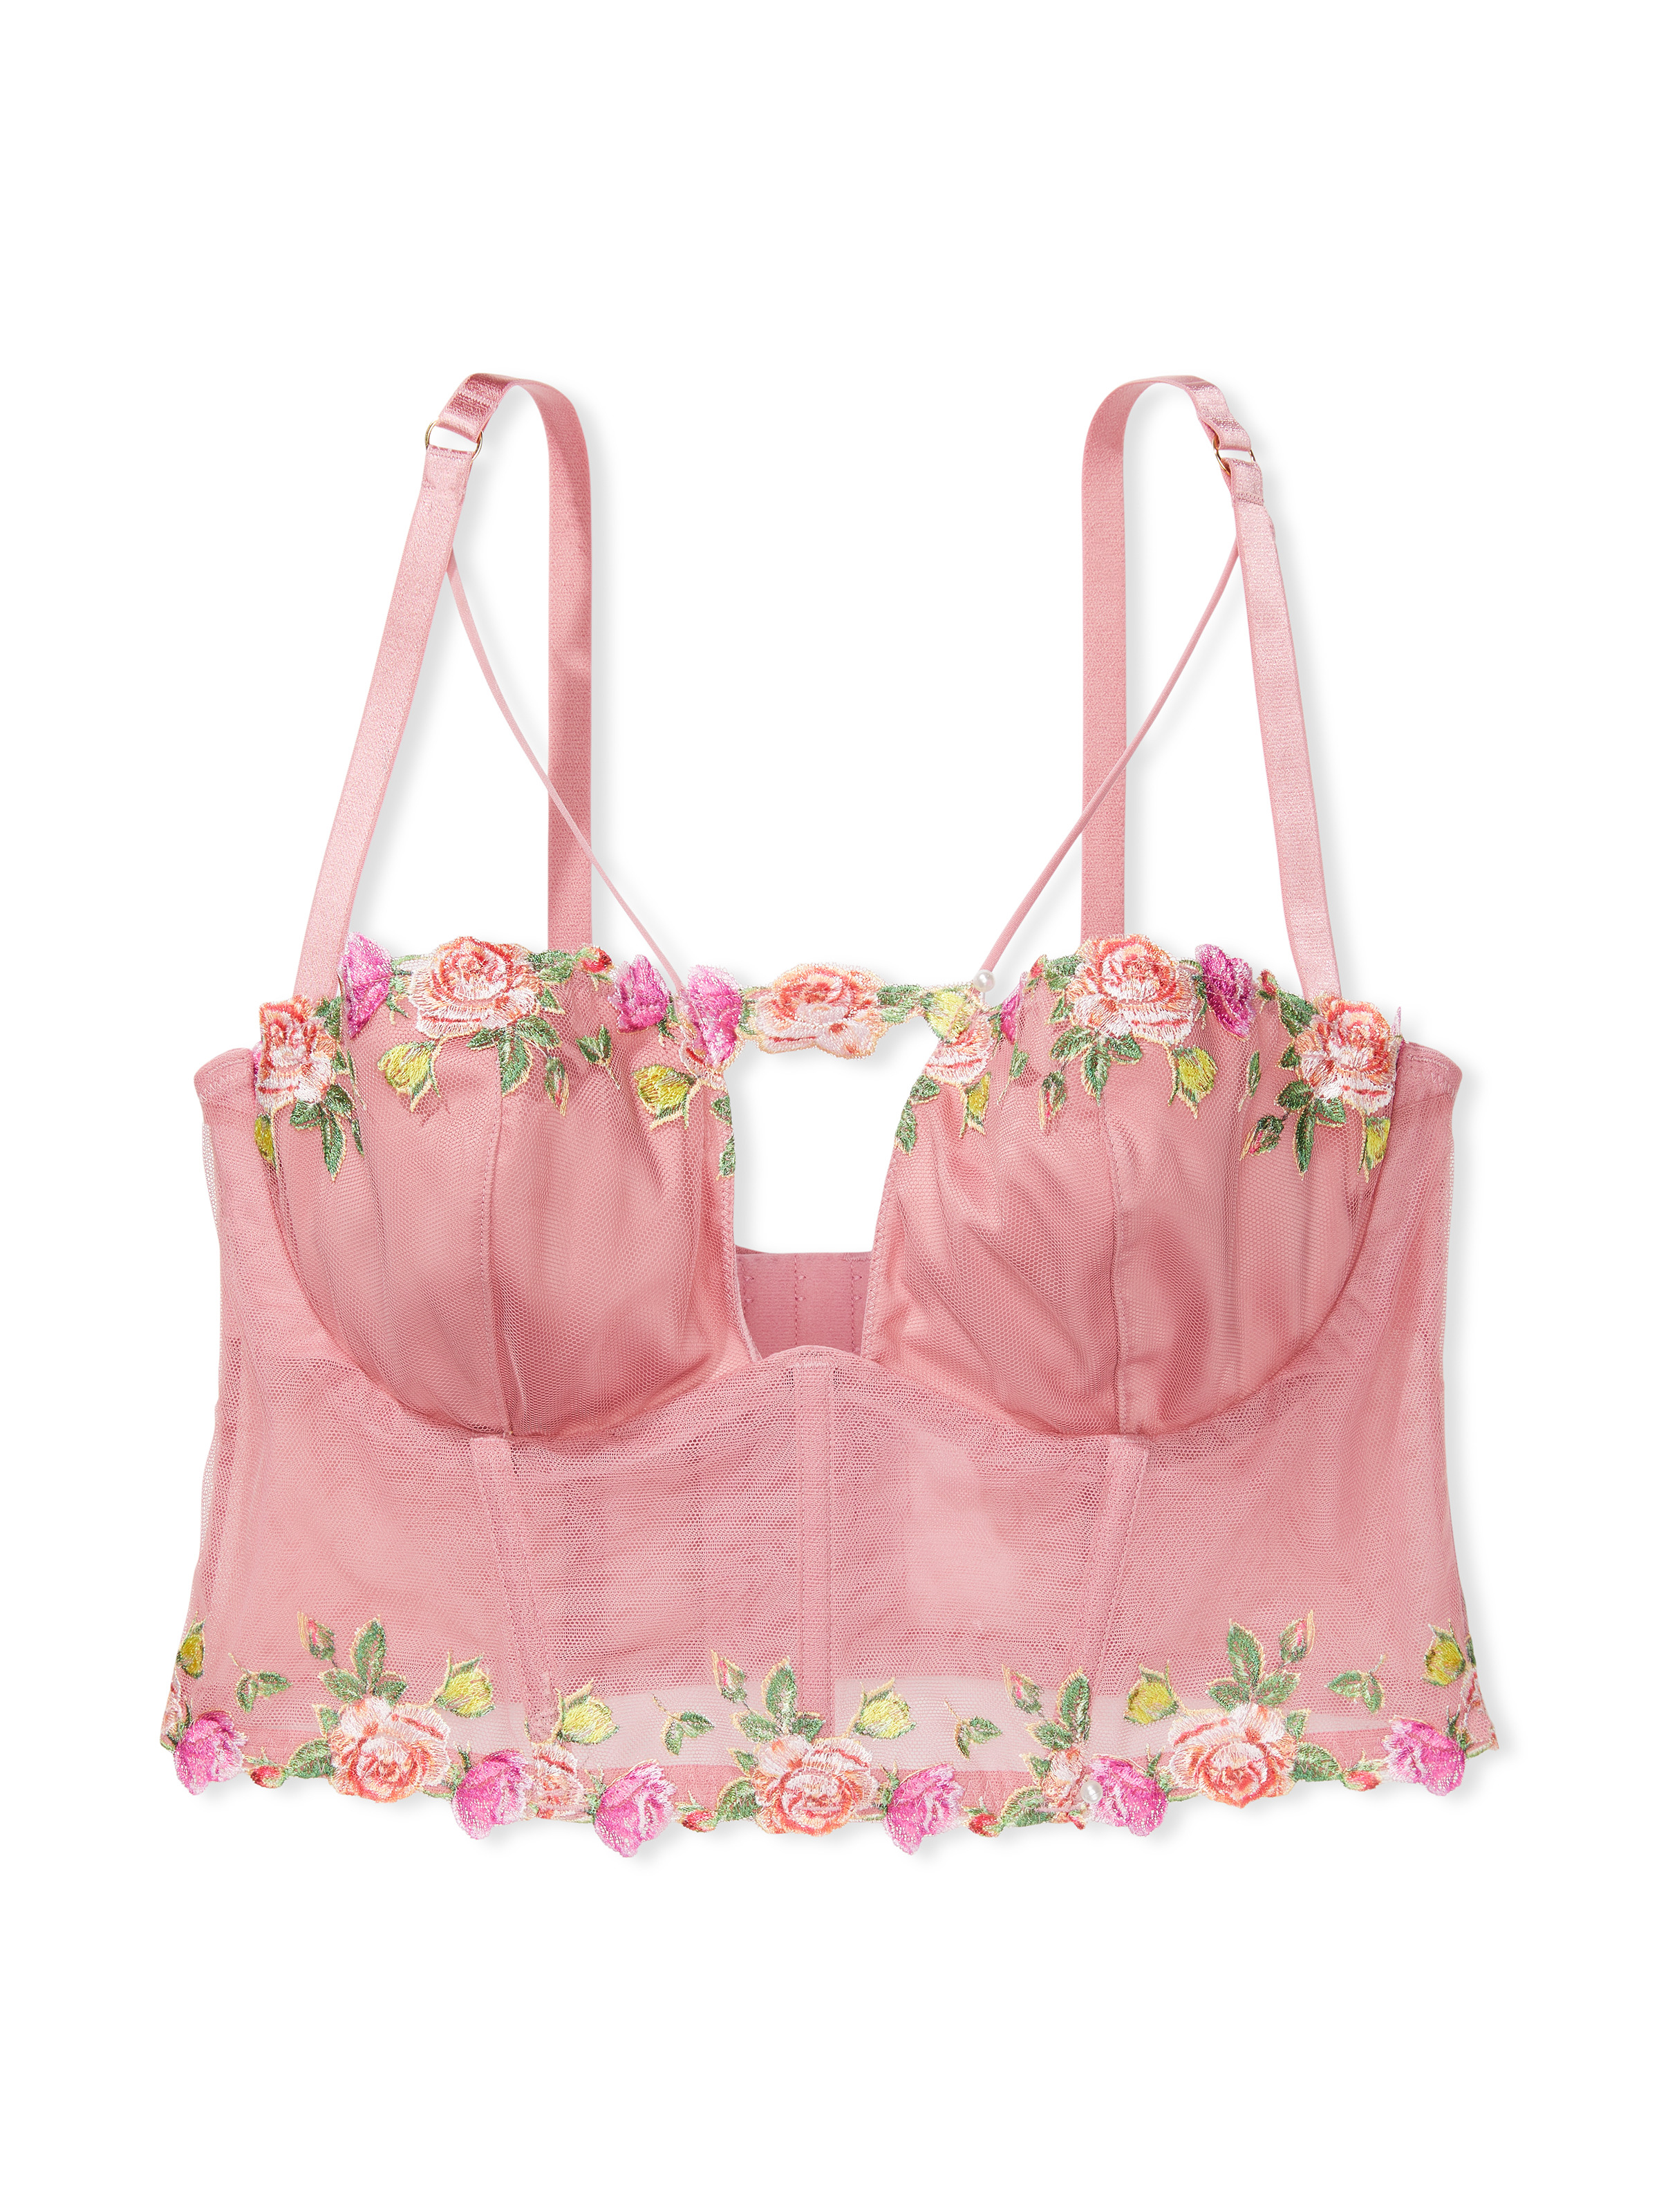 Victoria's Secret Unlined Embroidered Lace Up Bra Top